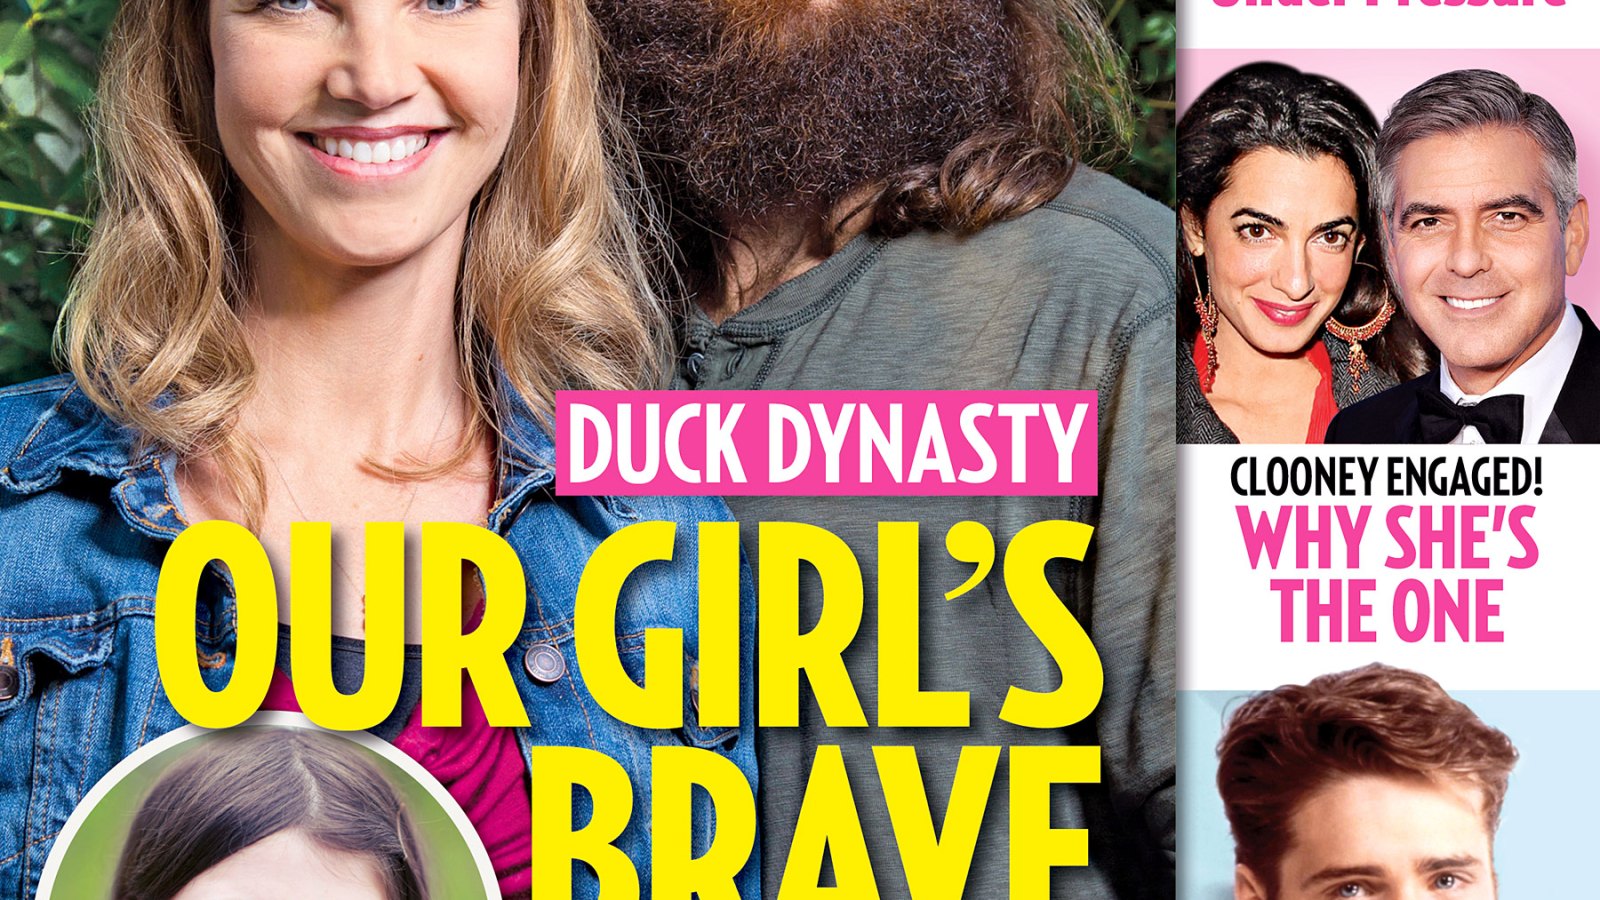 Duck Dynasty's Jase and Missy Robertson on the cover of Us Weekly